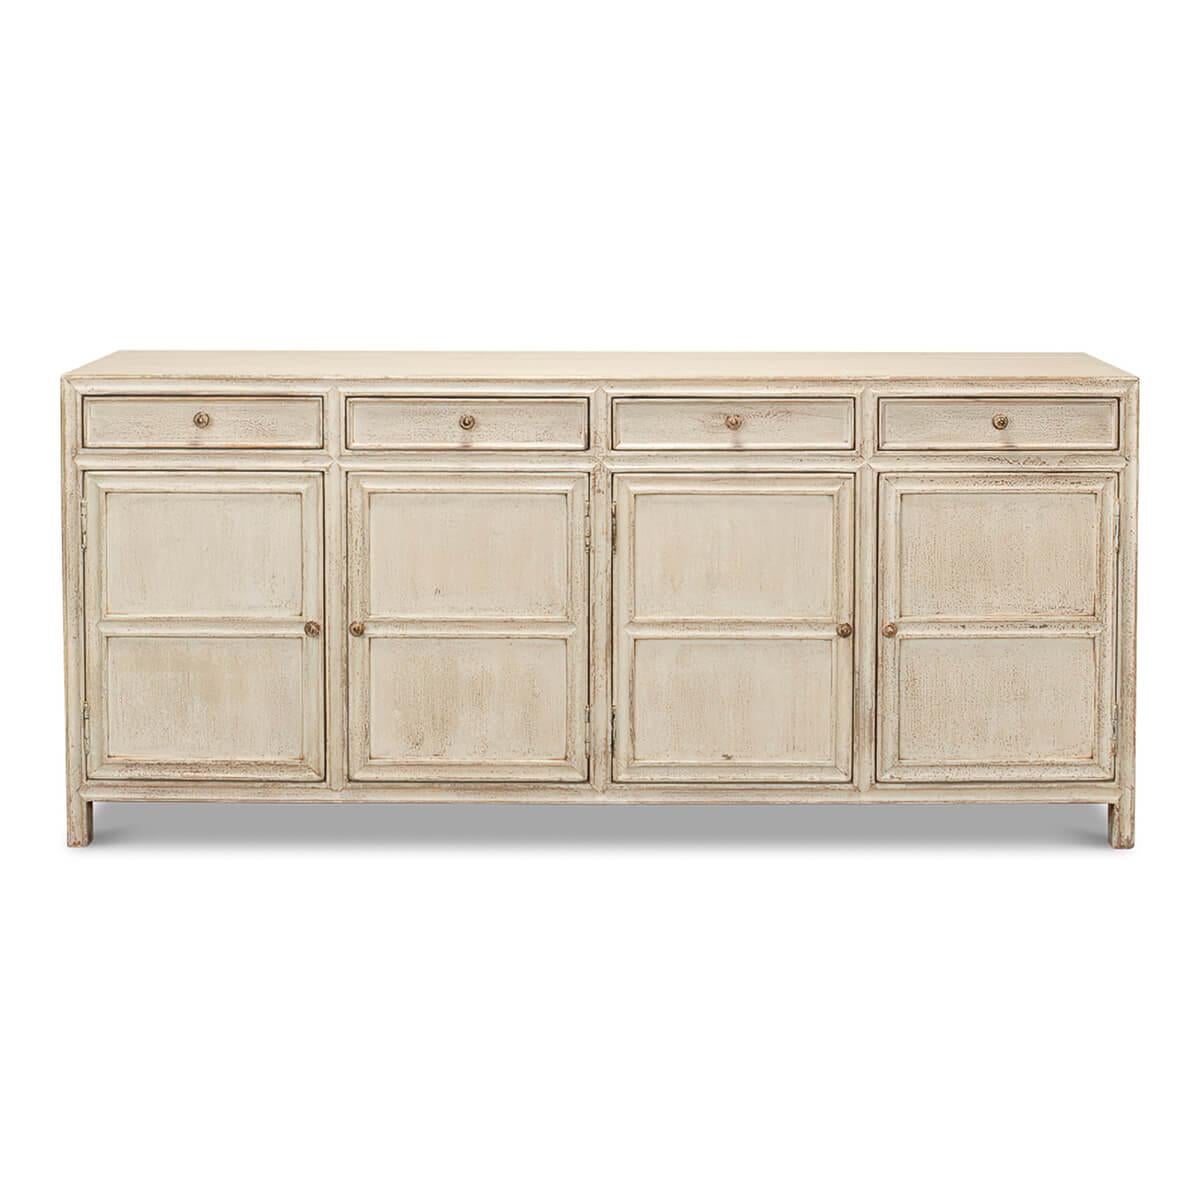 A modern whitewash painted sideboard with panel molding. This piece has four doors detailed with molding and four drawers with distressed metal hardware. 

This sideboard is crafted in pine with a distressed painted finish in eclectic white.